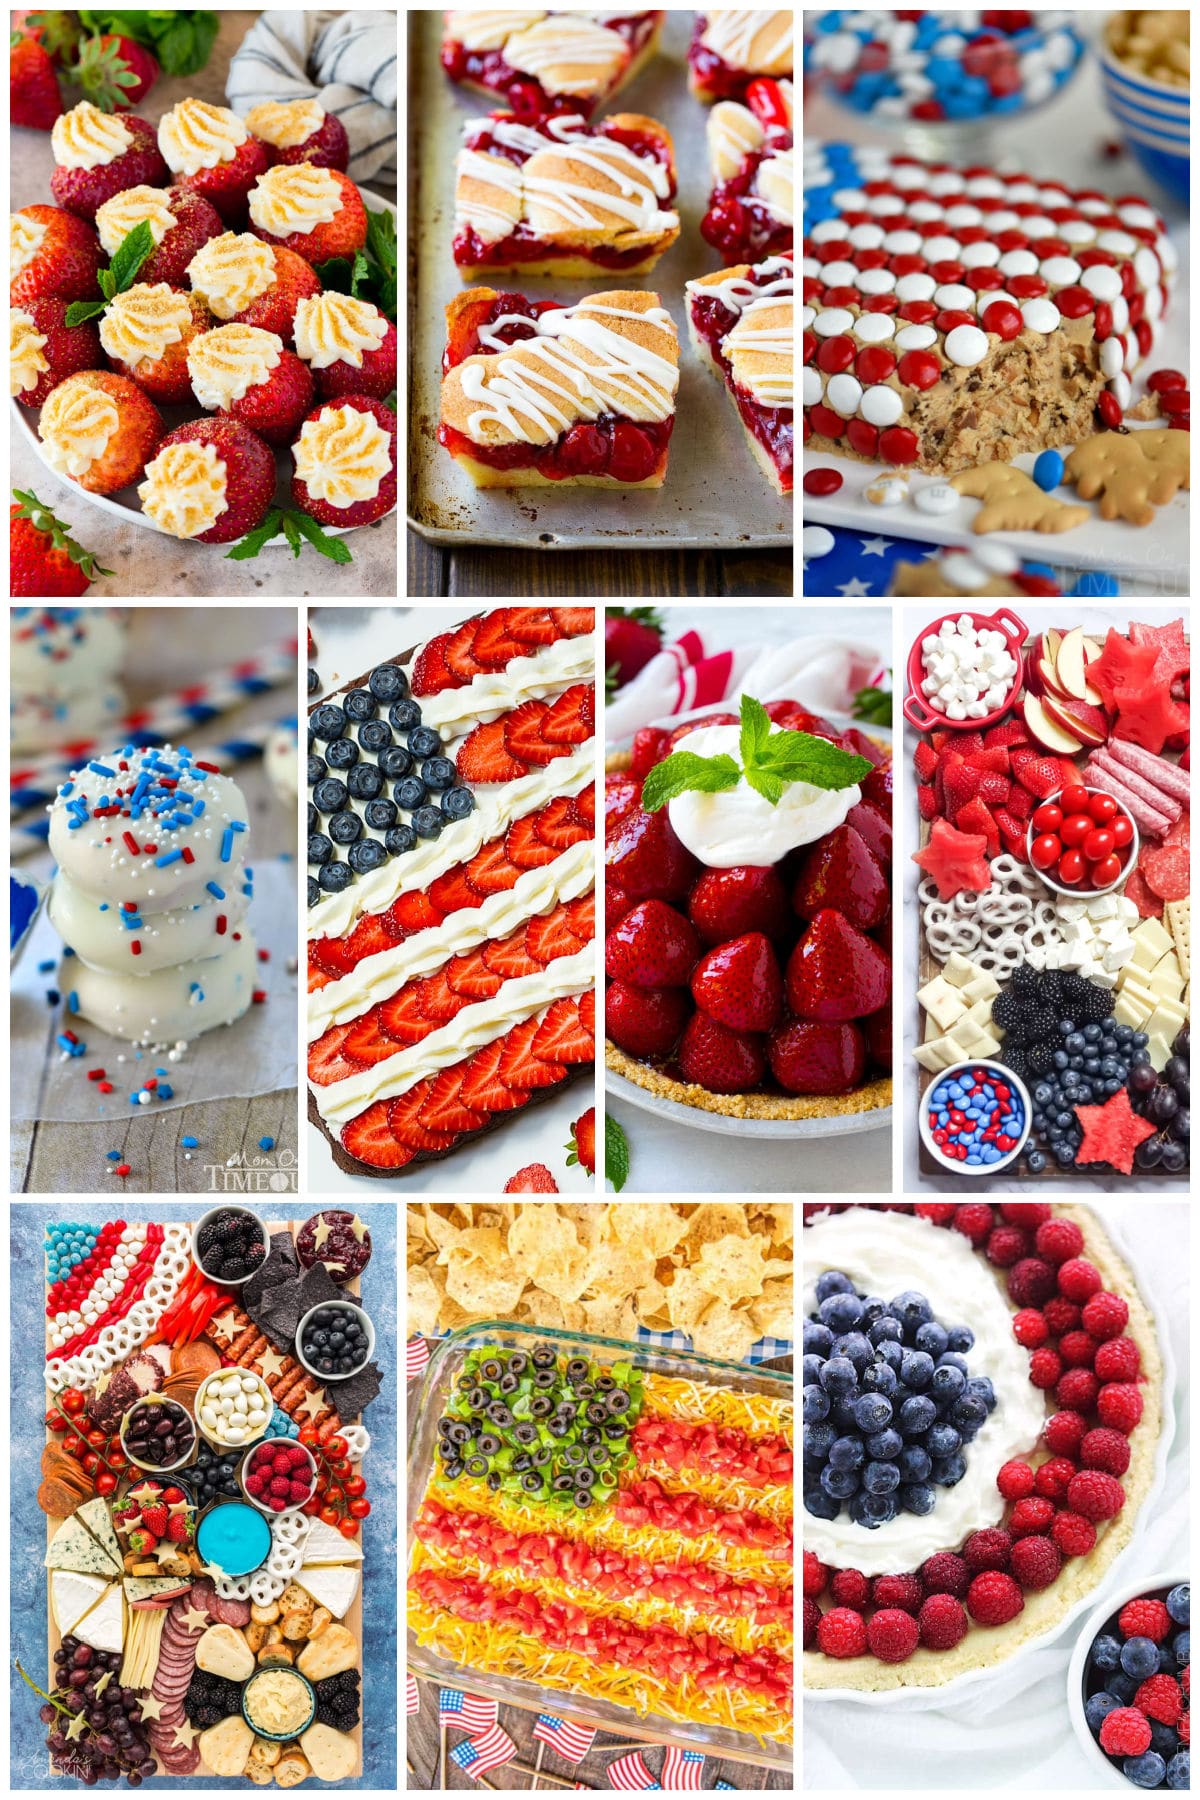 A collection of patriotic red, white and blue recipes like fresh strawberry pie and cherry bars.